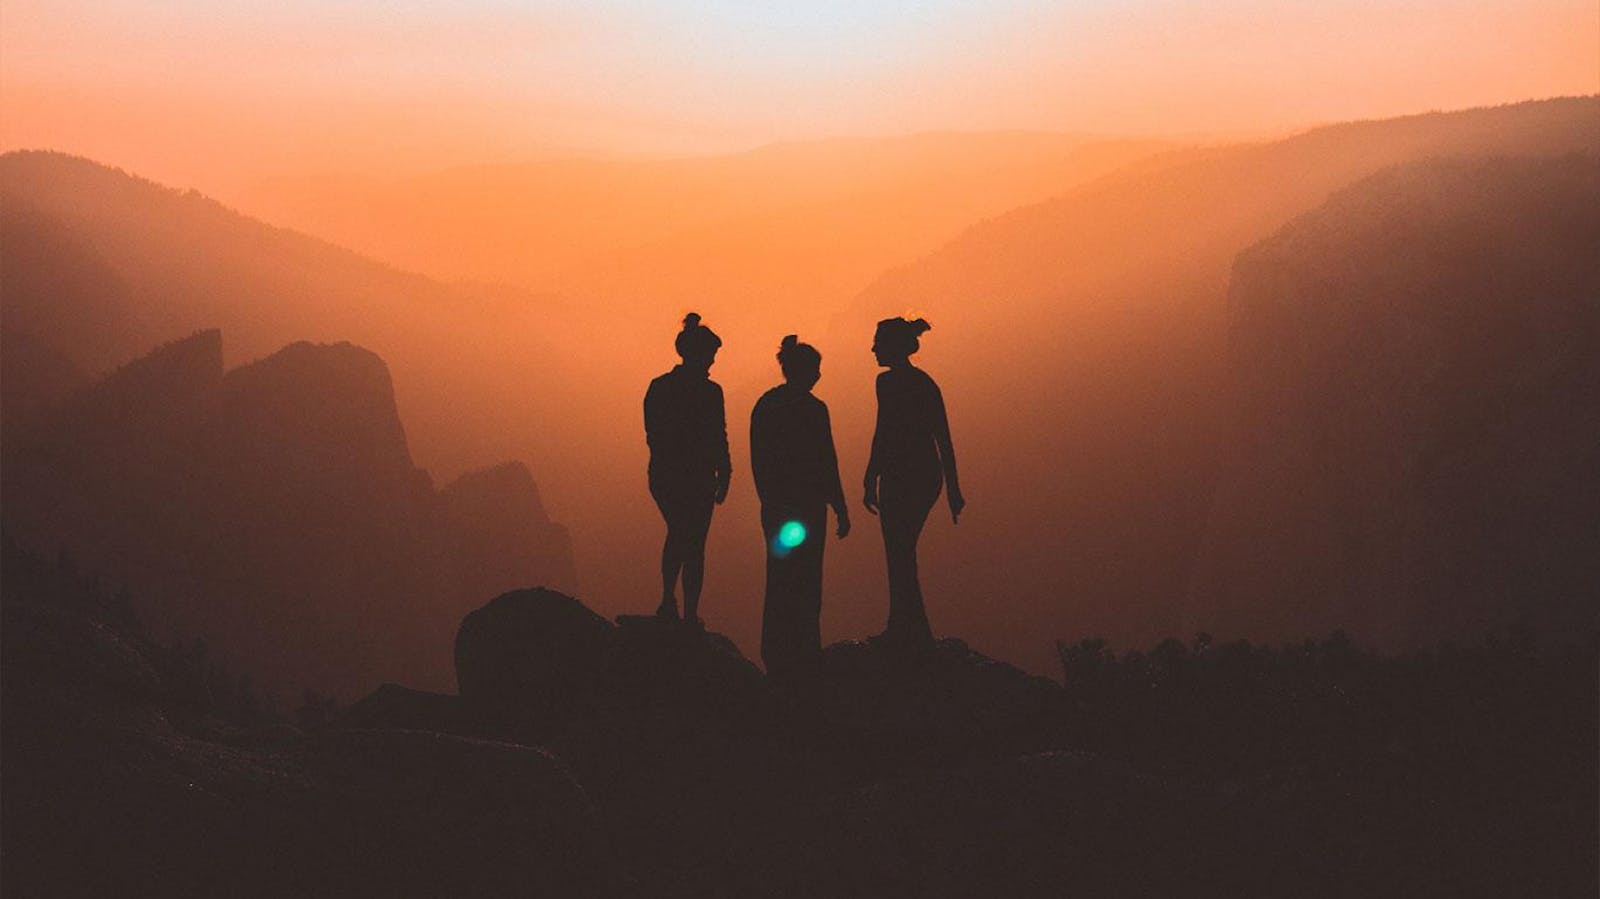 Three women standing on a mountain peak with an orange-tinted sunset view